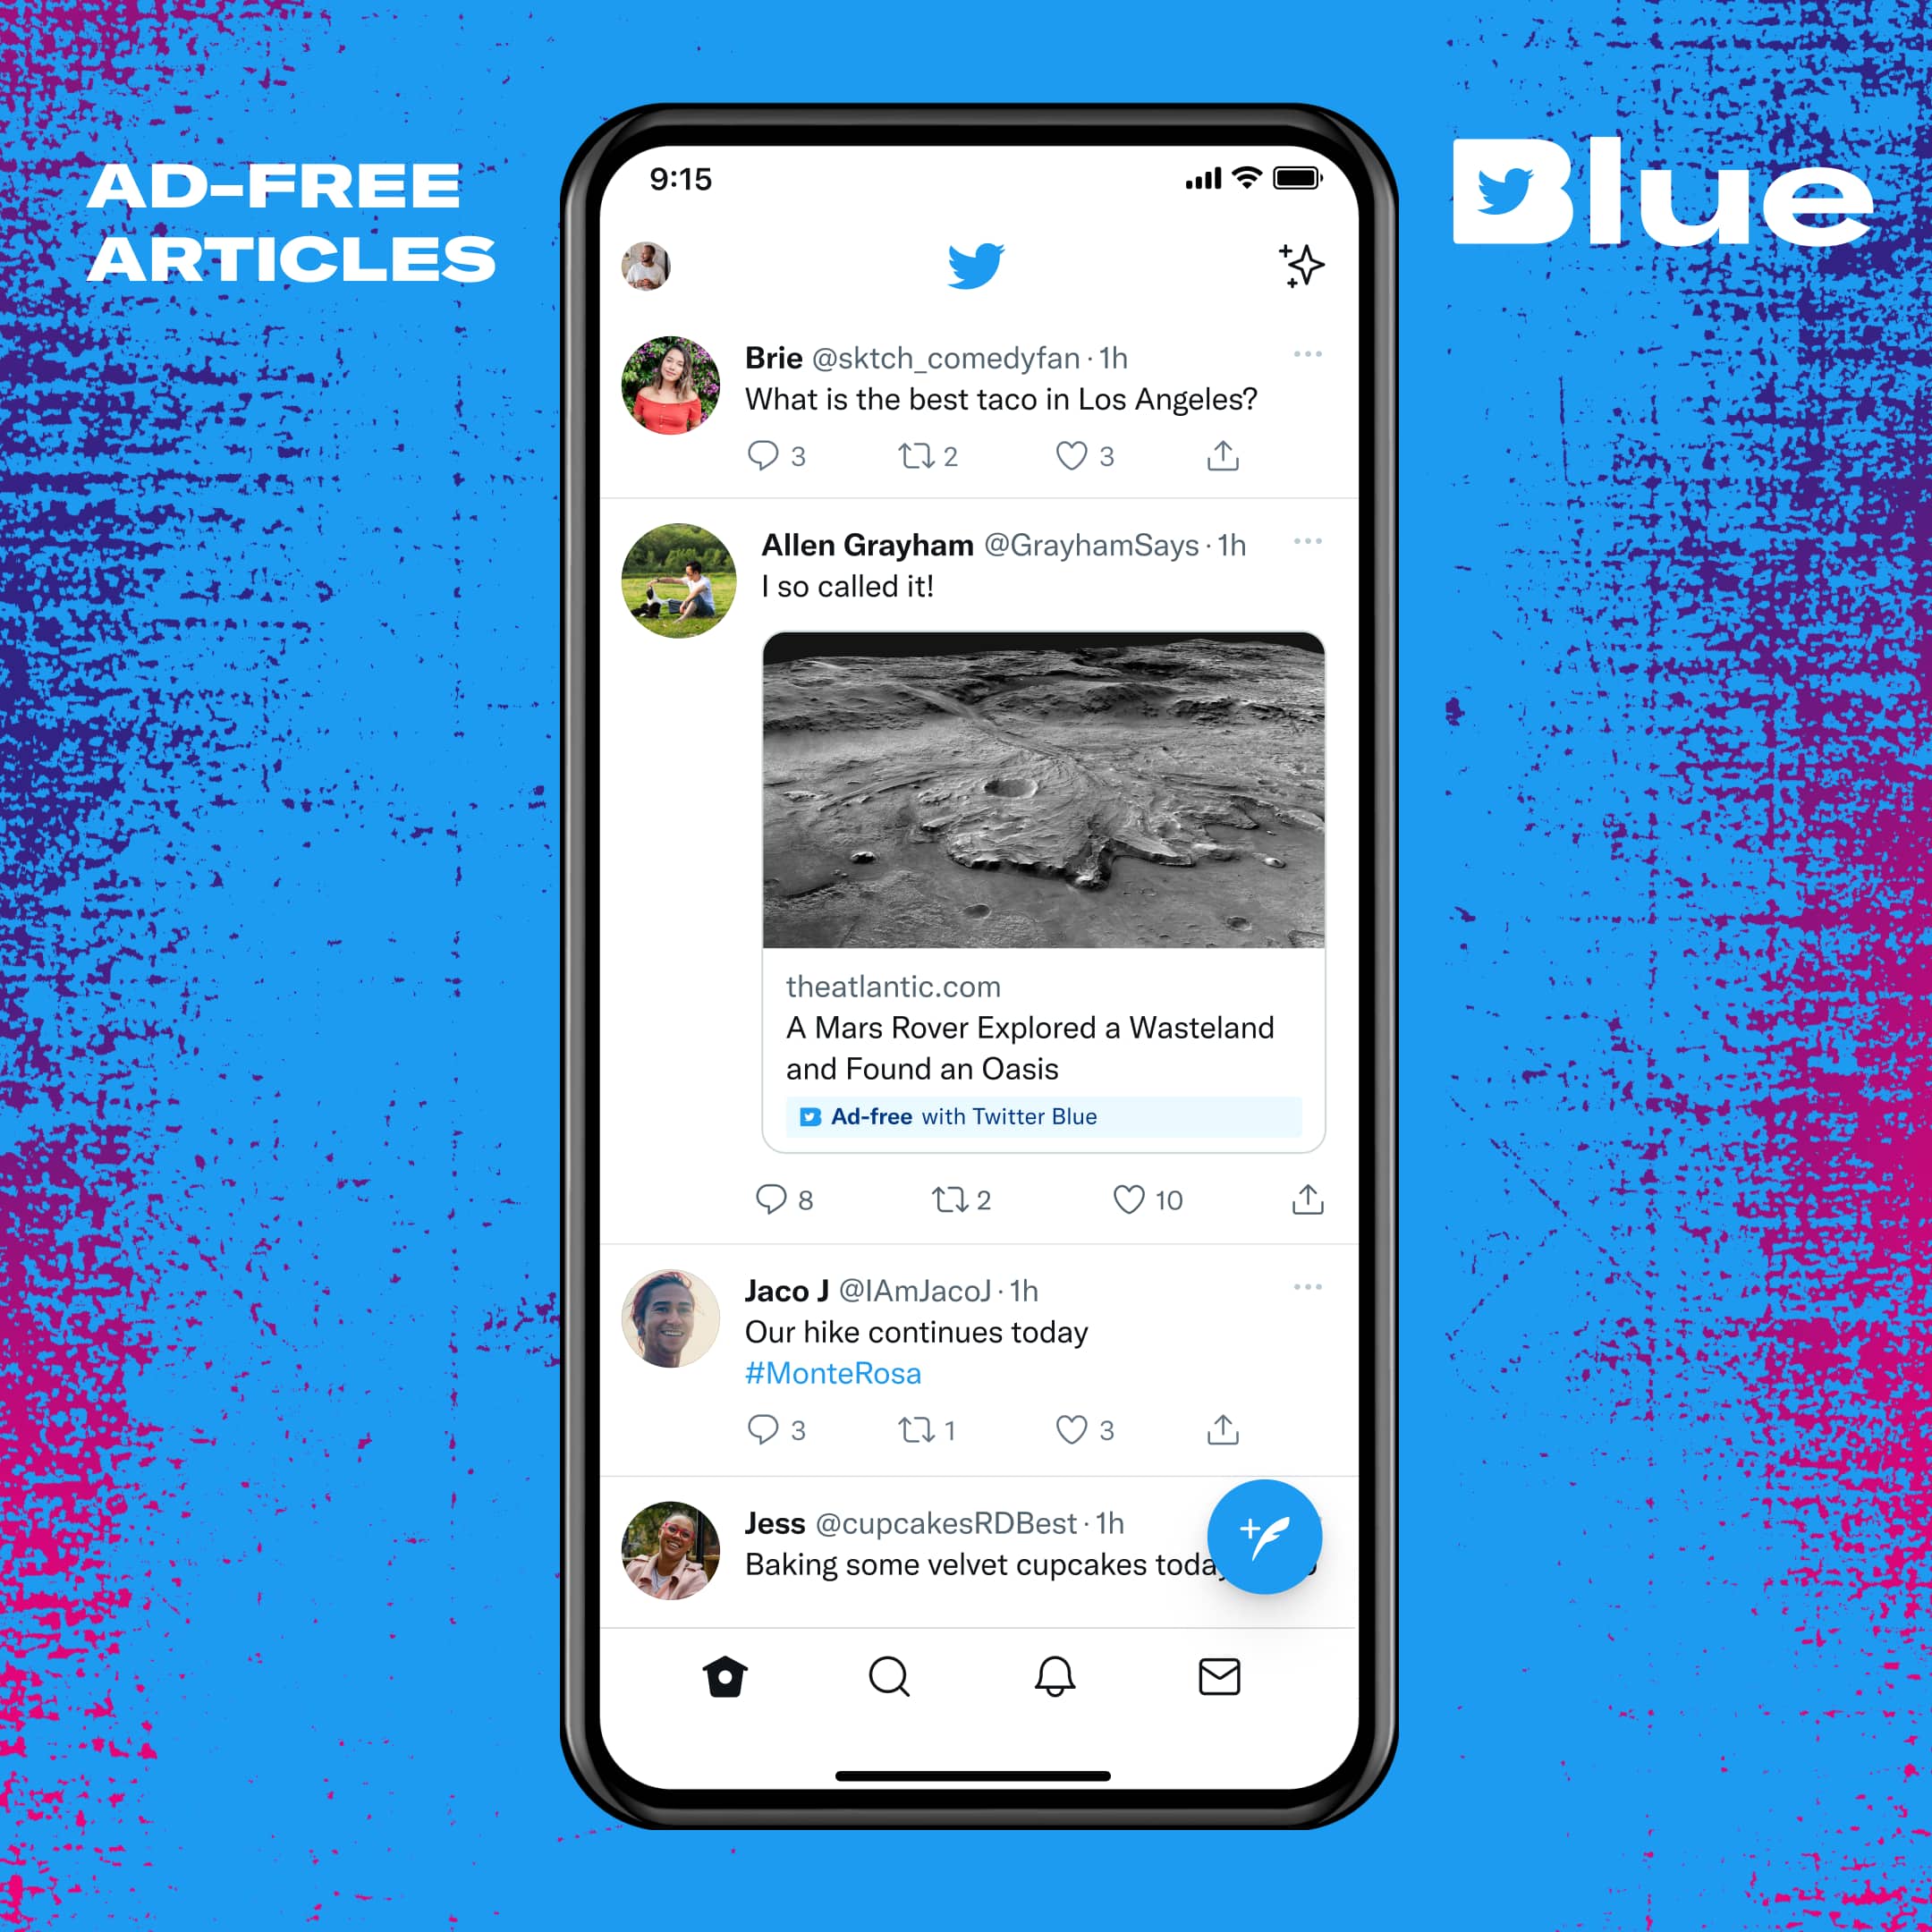 Promotional graphic for ad-free reading of articles at participating websites available with the Twitter Blue subscription on iPhone